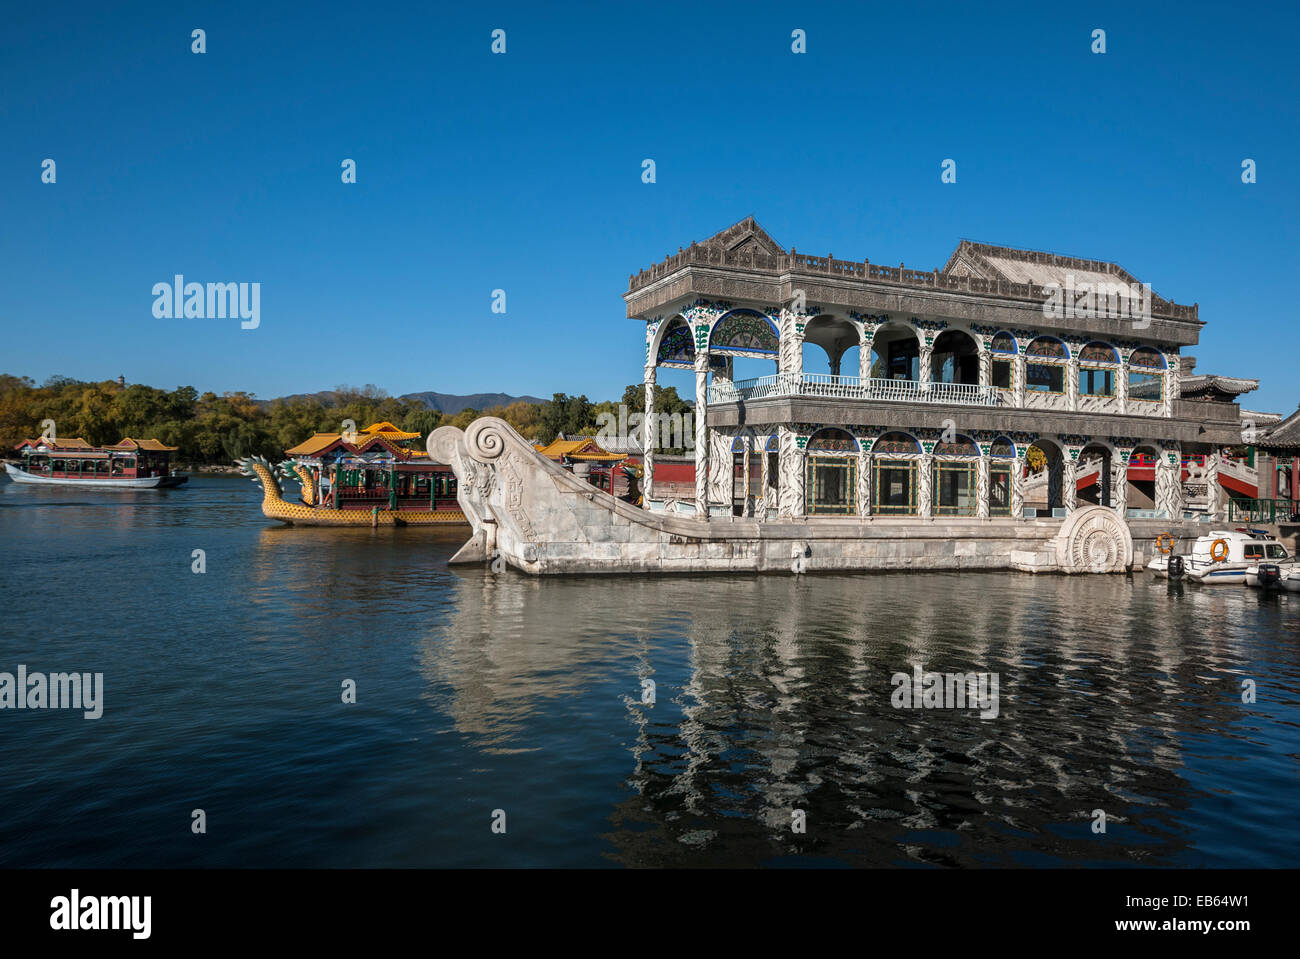 The stone boat was made in 1755, Qing dynasty, repaired in 1893, Summer Palace, Beijing Stock Photo